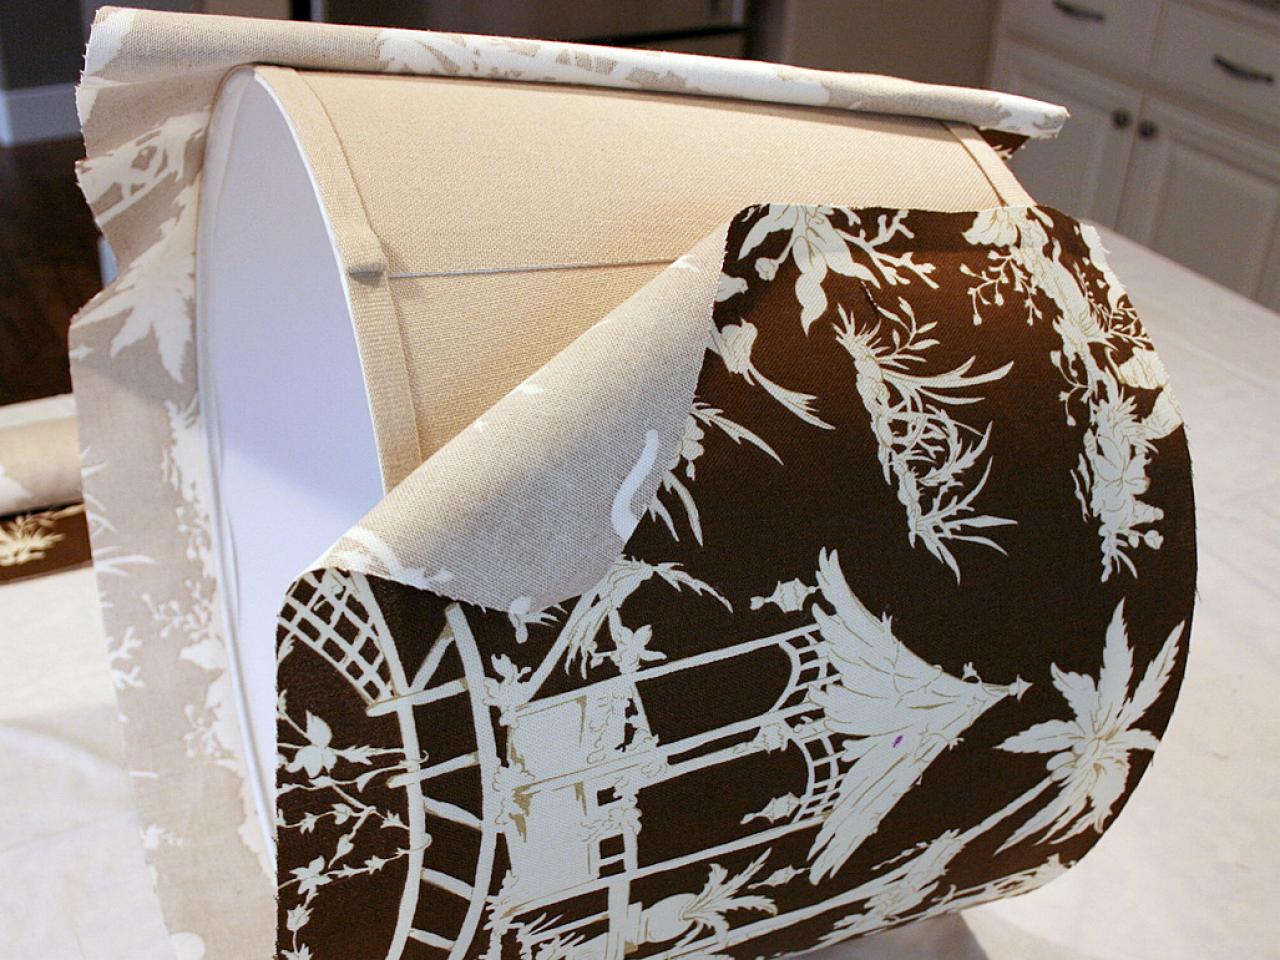 Custom Fabric Covered Lampshade, Covering A Lampshade Frame With Fabric